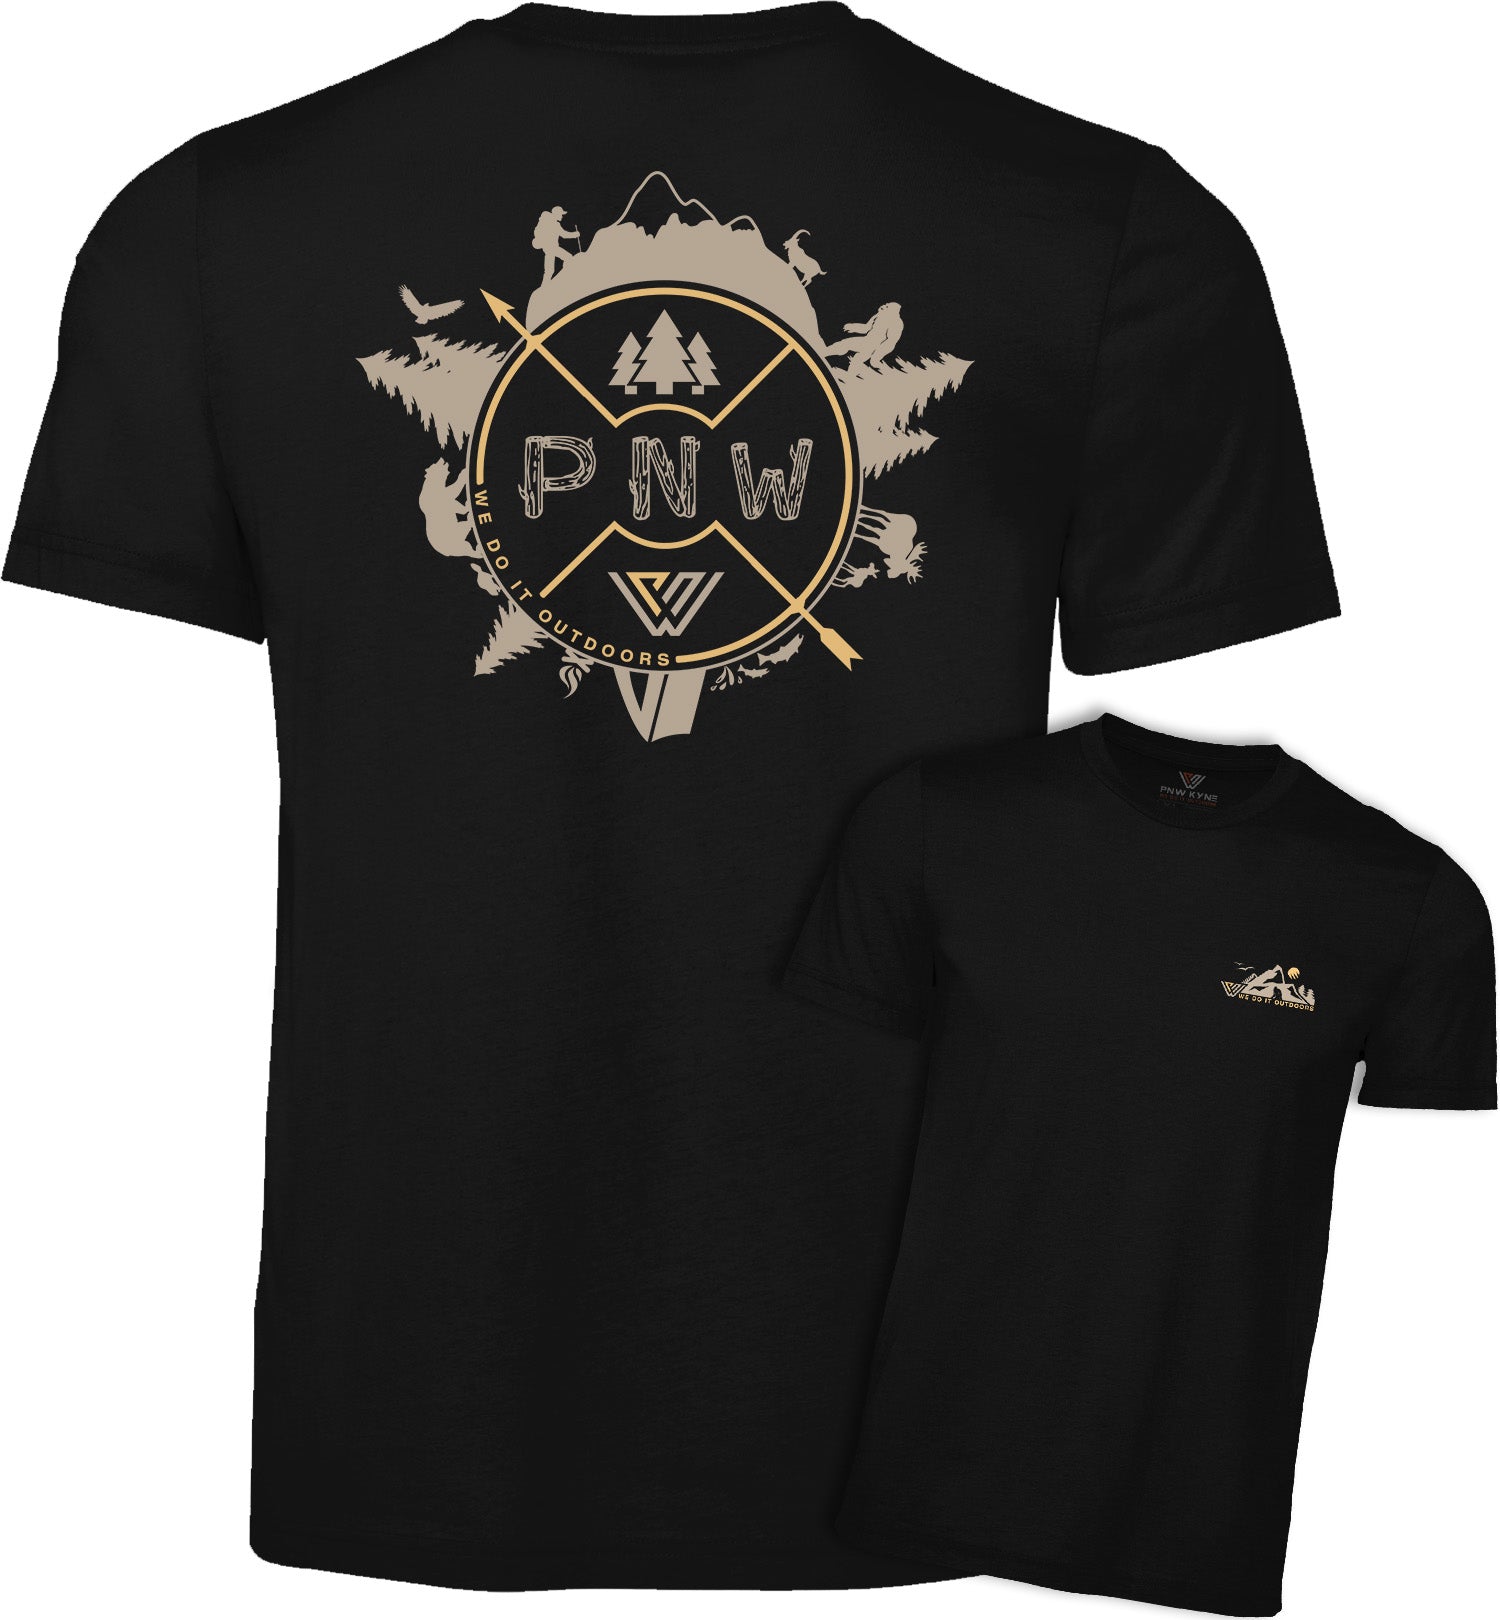 PNW Shirt - Around the PNW - Short Sleeve - Combined - Black Brown